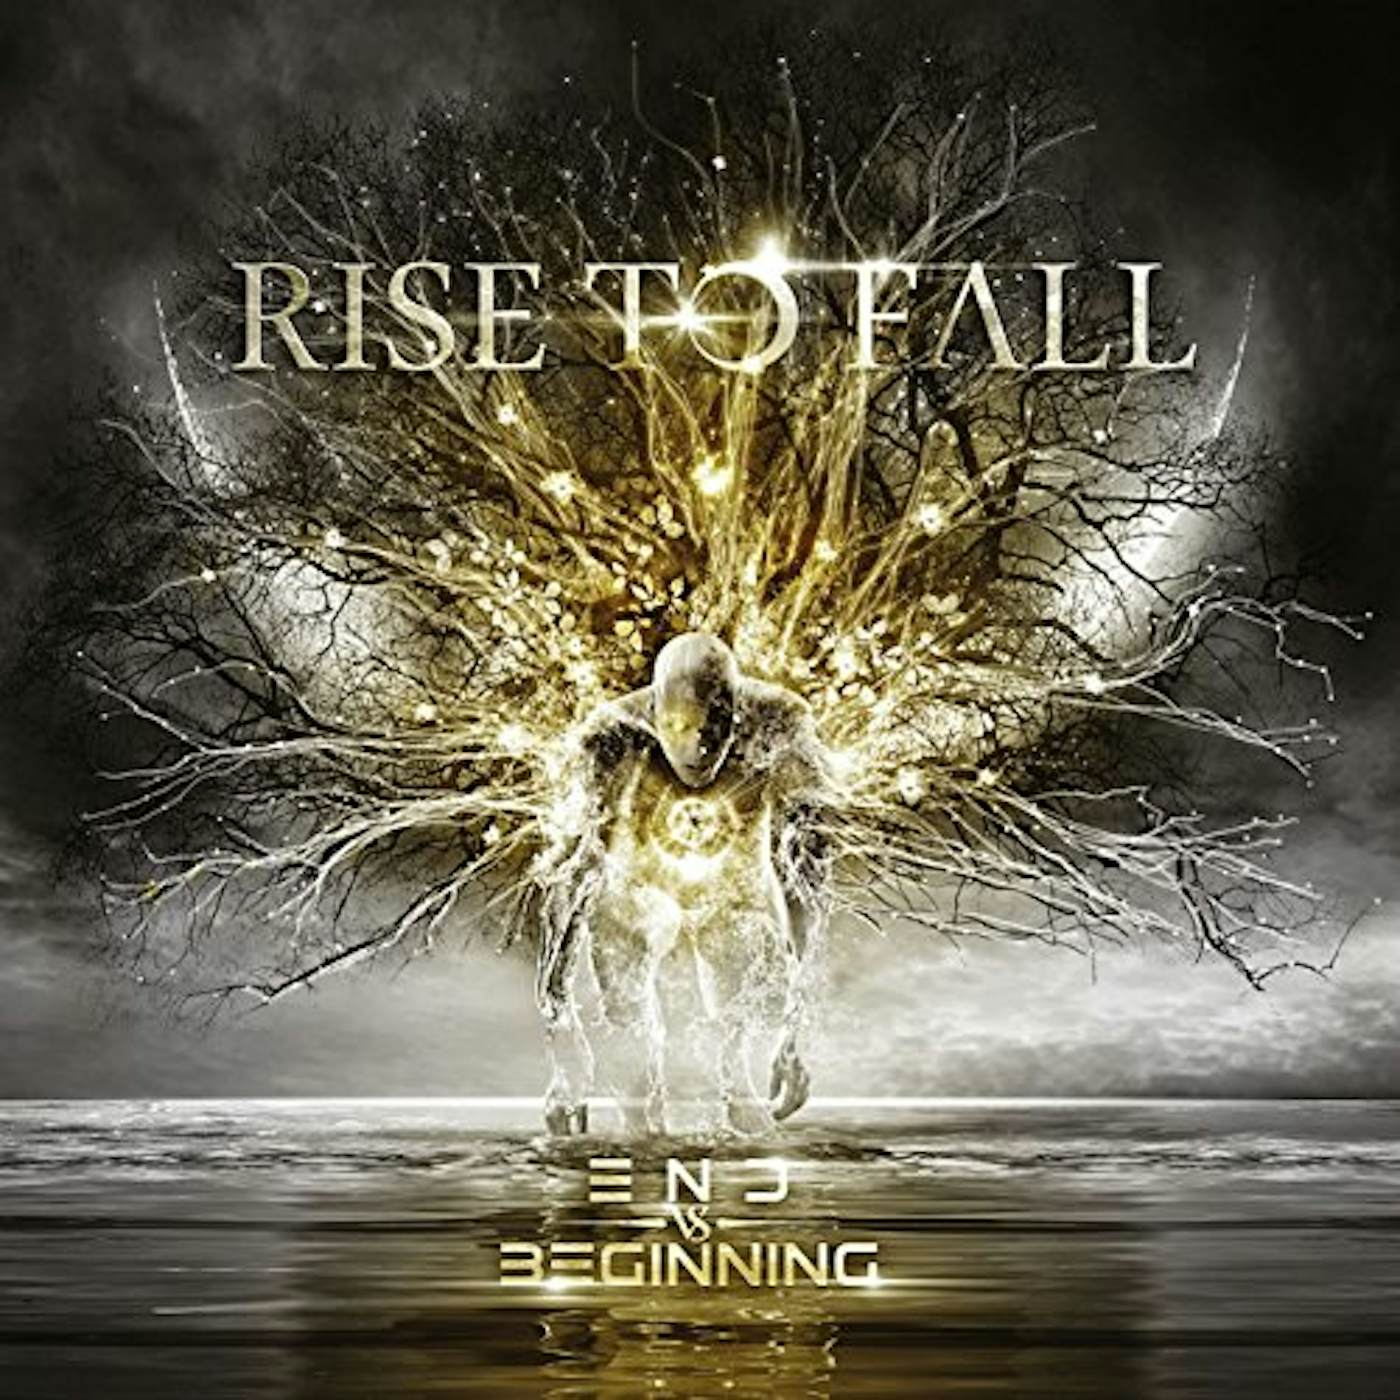 Rise to Fall END VS. BEGINNING CD